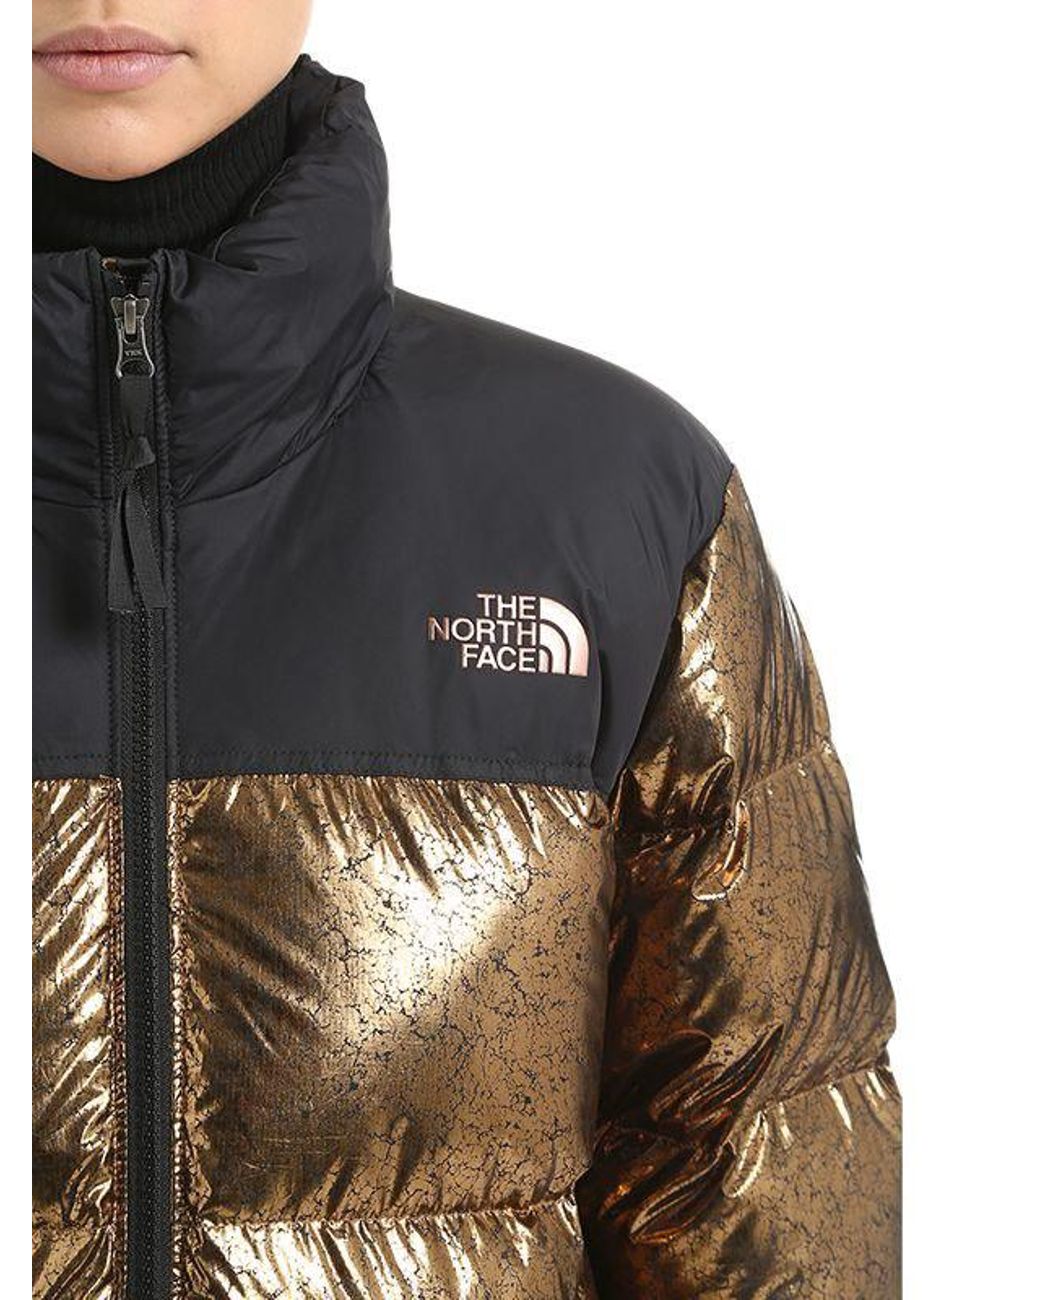 The North Face Nuptse Duster Long Down Jacket in Metallic | Lyst Australia